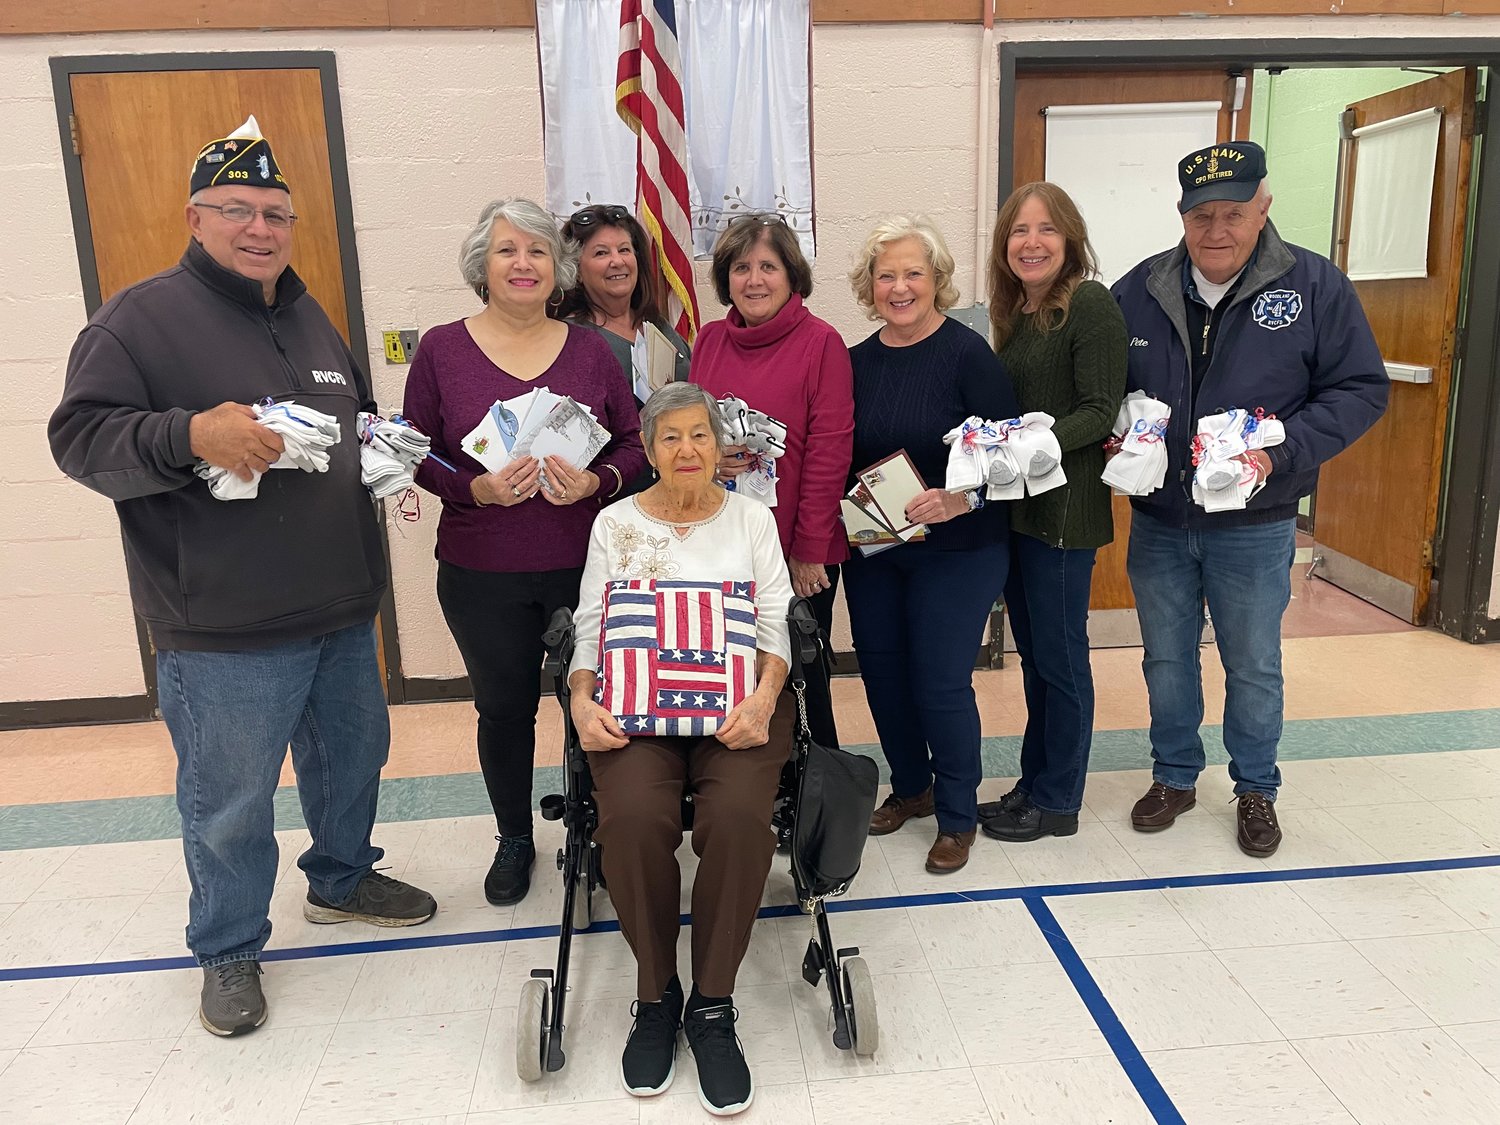 American Legion Post No. 303 Commander Frank Colón, left, joins the RVC Homemakers’ Betty Iaconetti of North Merrick, Karen Alterson of Oceanside, Anna Biamonte of Merrick, seated with the quilt, Laura Schuler of Rockville Centre, Patty Gaffney of Oceanside, Mary Ann Grandazza of Rockville Centre, and American Legion member Pete Kaiser, as they donate much-needed socks and personalized cards to veterans.